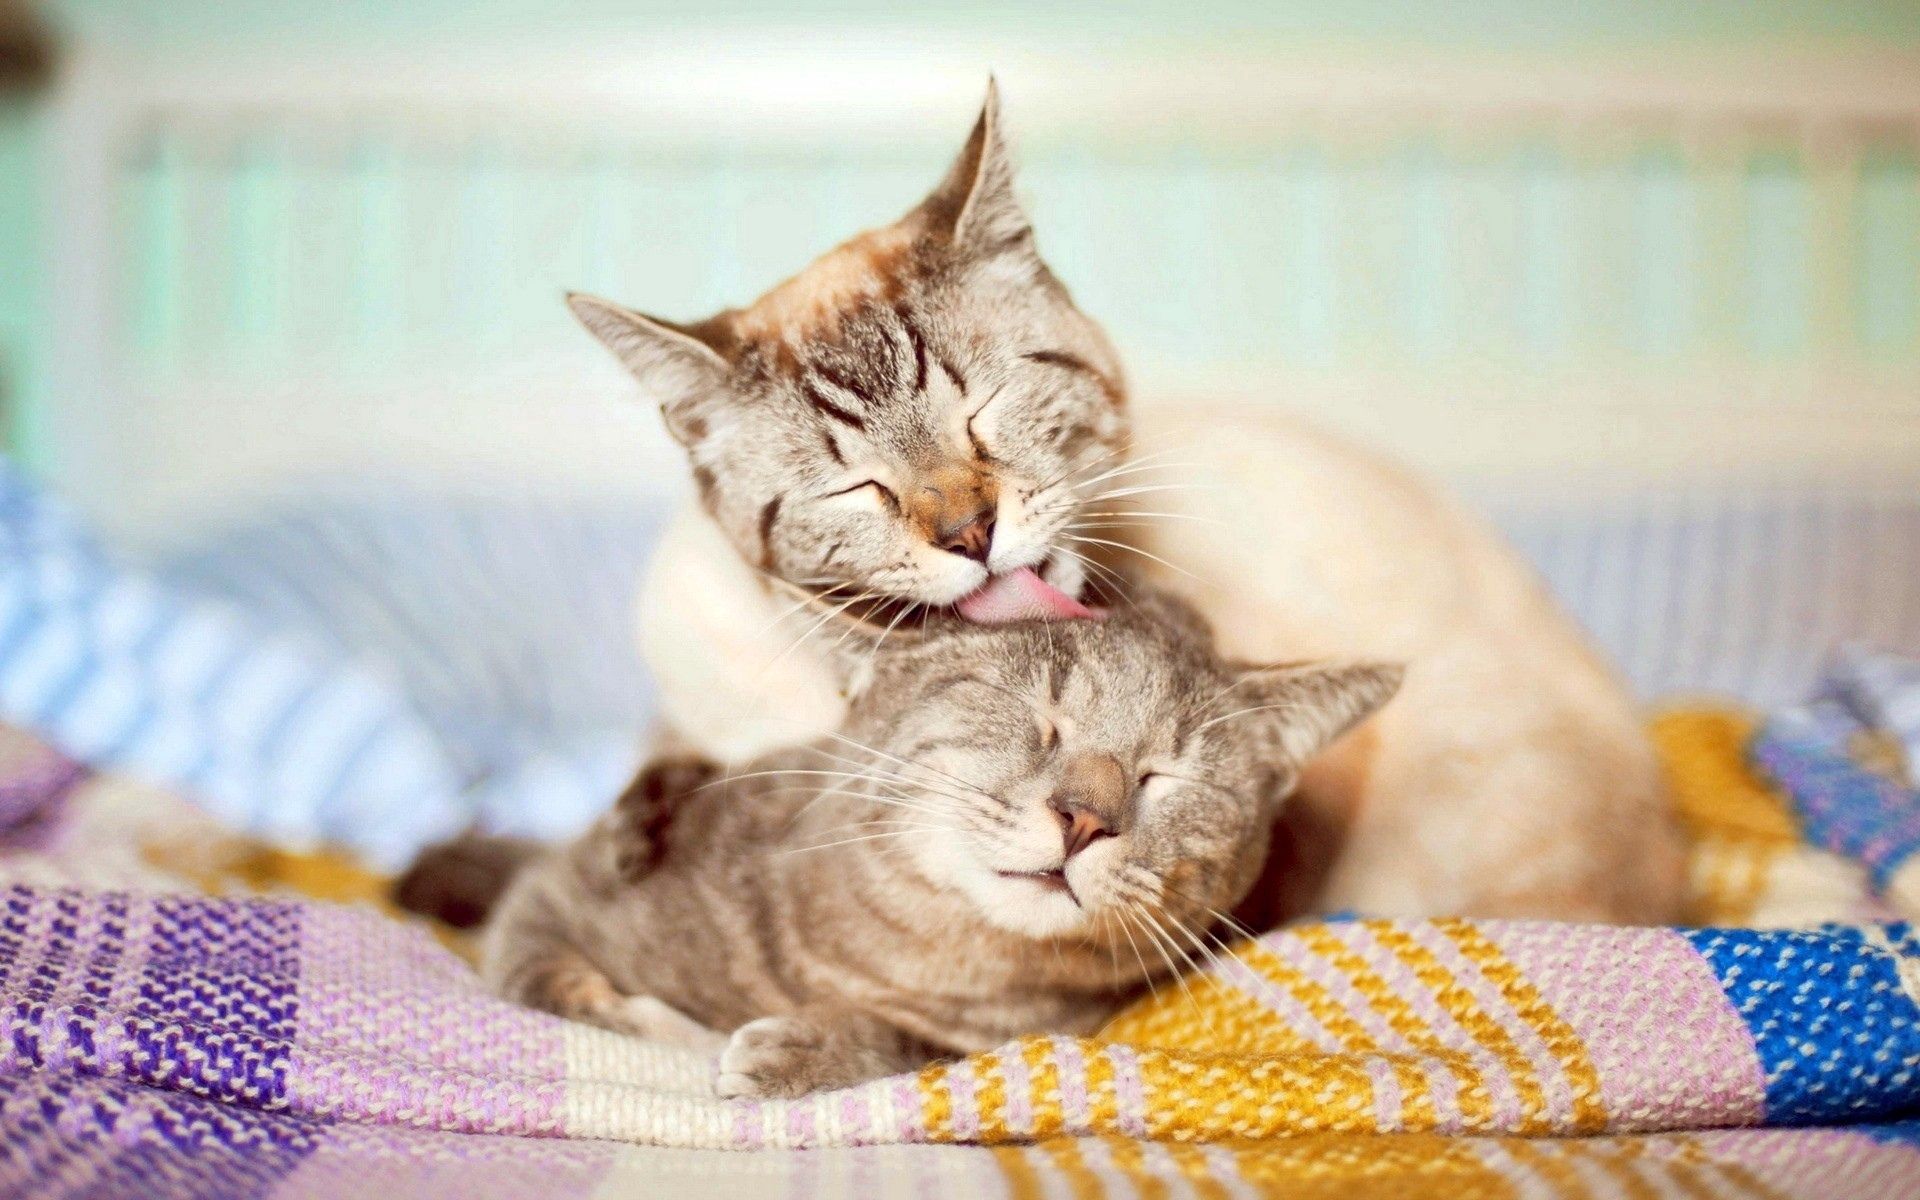 cats, animals, couple, pair, care, tenderness